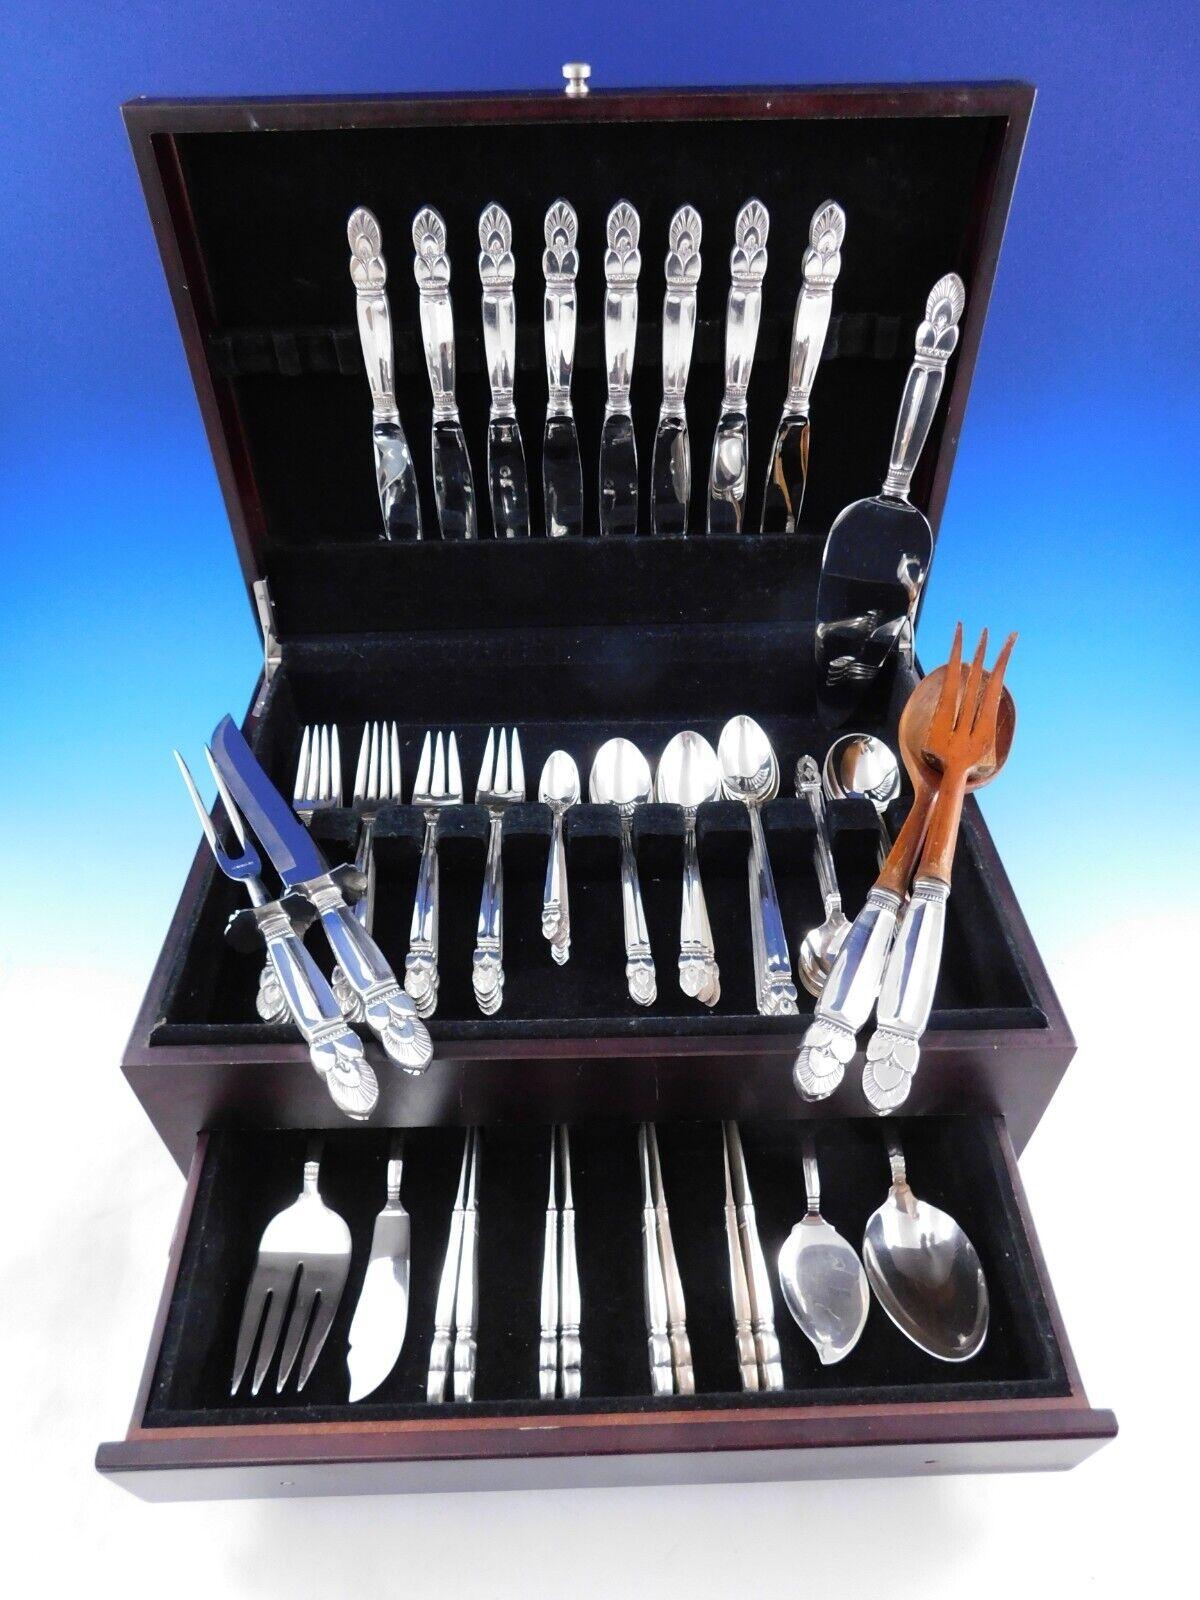 Princess Ingrid by Frank Whiting Sterling Silver Flatware set - 73 pieces. This set includes:

8 Regular Knives, 9